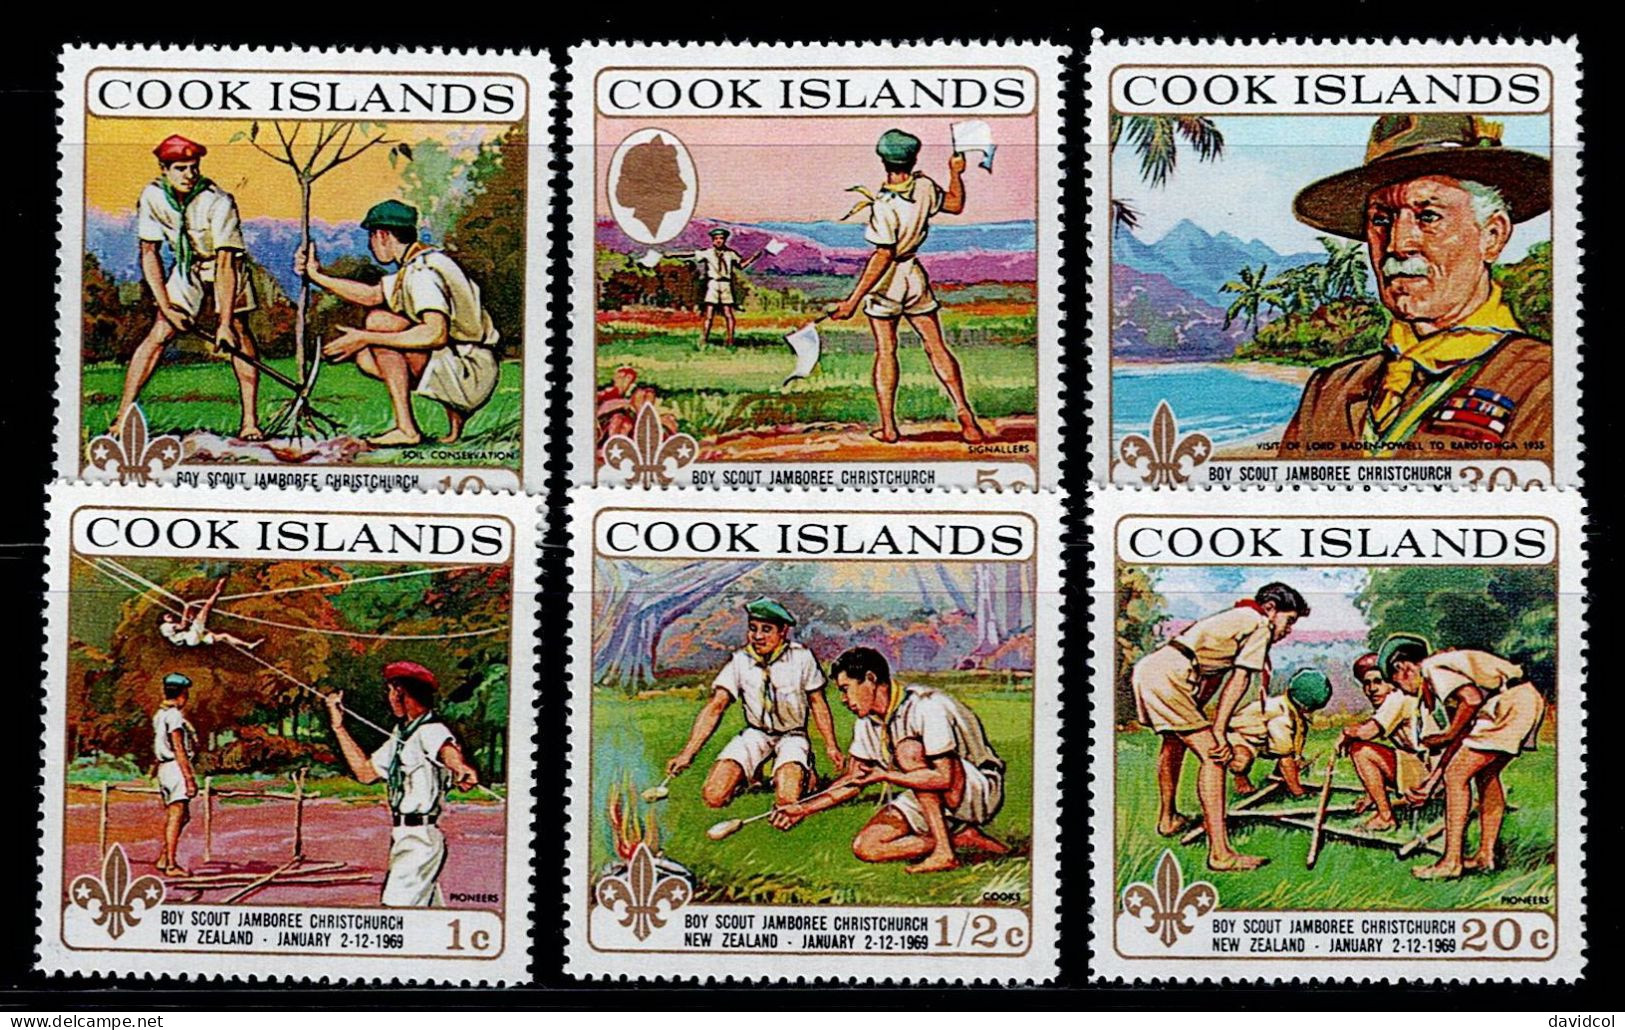 COO-01- COOK ISLANDS - 1969 - MNH -SCOUTS- SCOUT JAMBOREE NEW ZEALAND - Cook